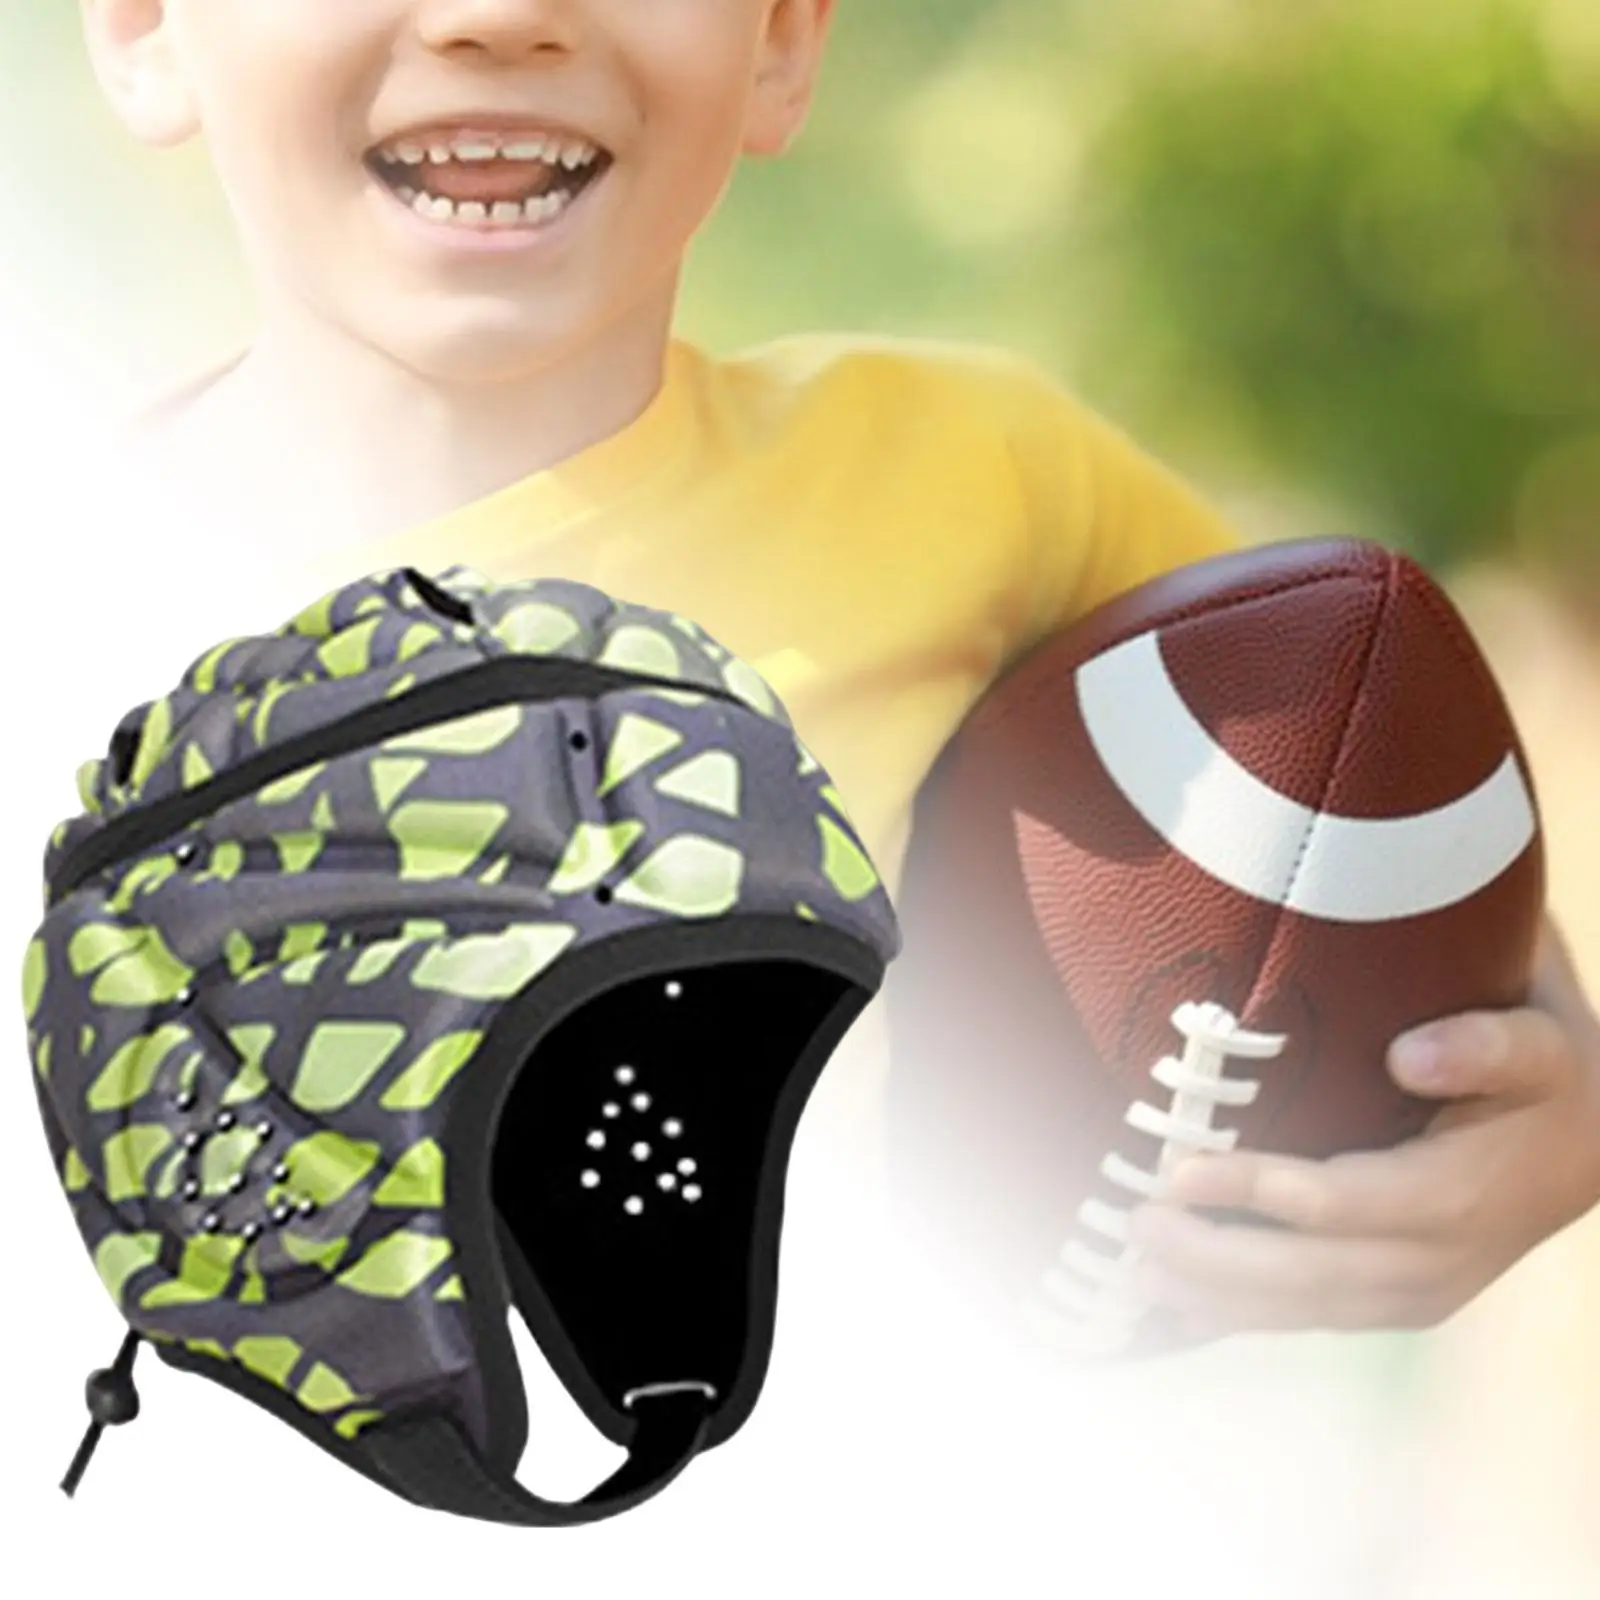 Football Hat Child Youth Protective Adjustable Rugby Headgear for Skateboard Hockey Baseball Head Protection